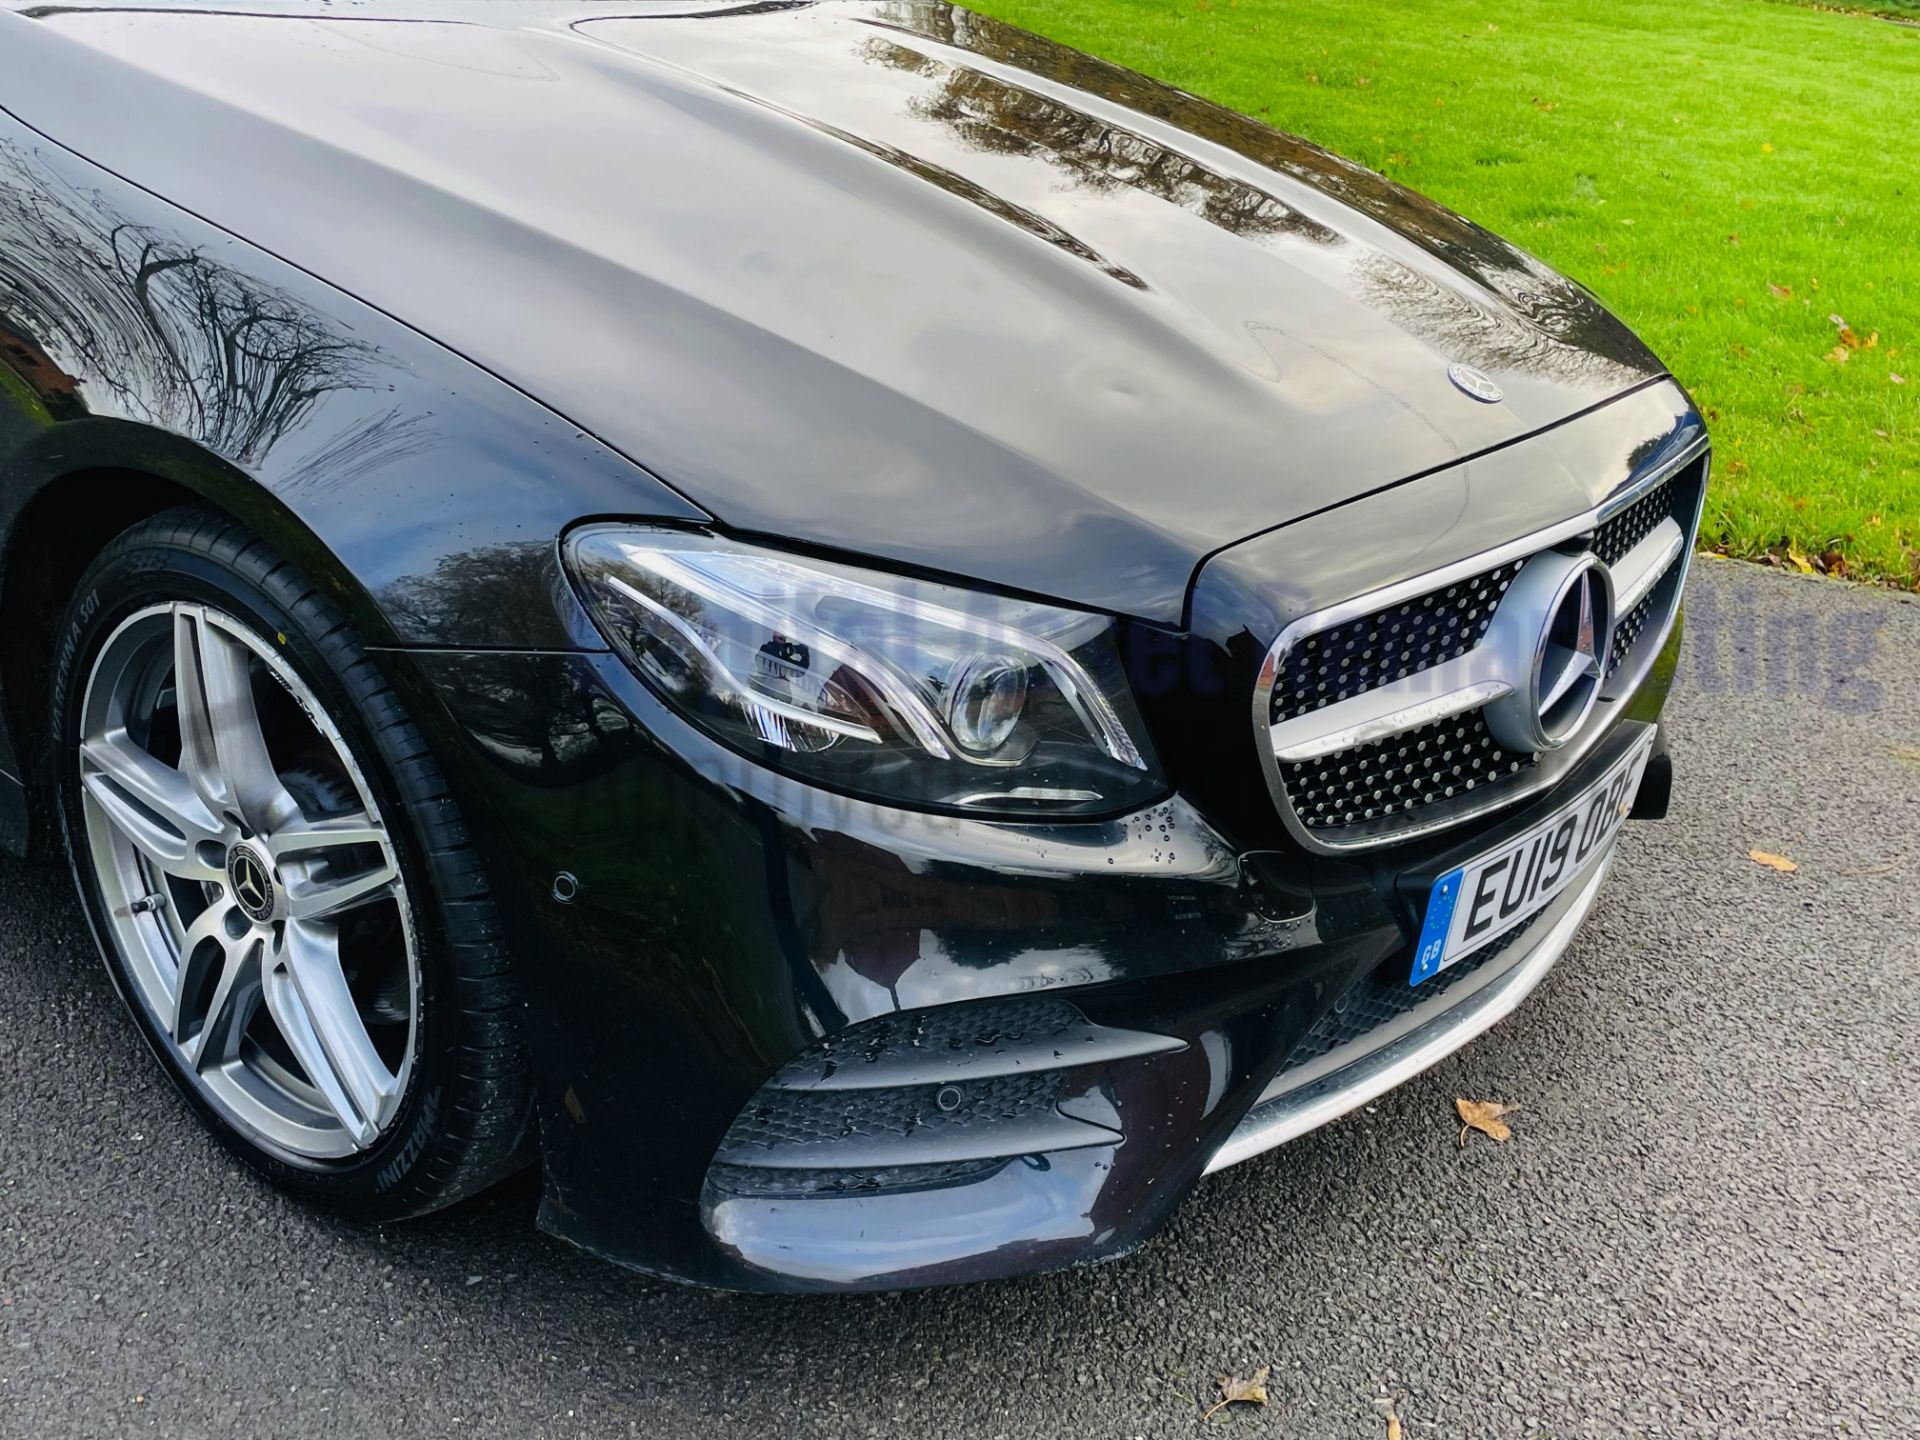 MERCEDES-BENZ E220d *AMG LINE - CABRIOLET* (2019 - EURO 6) '9G TRONIC AUTO - SAT NAV' *FULLY LOADED* - Image 29 of 66